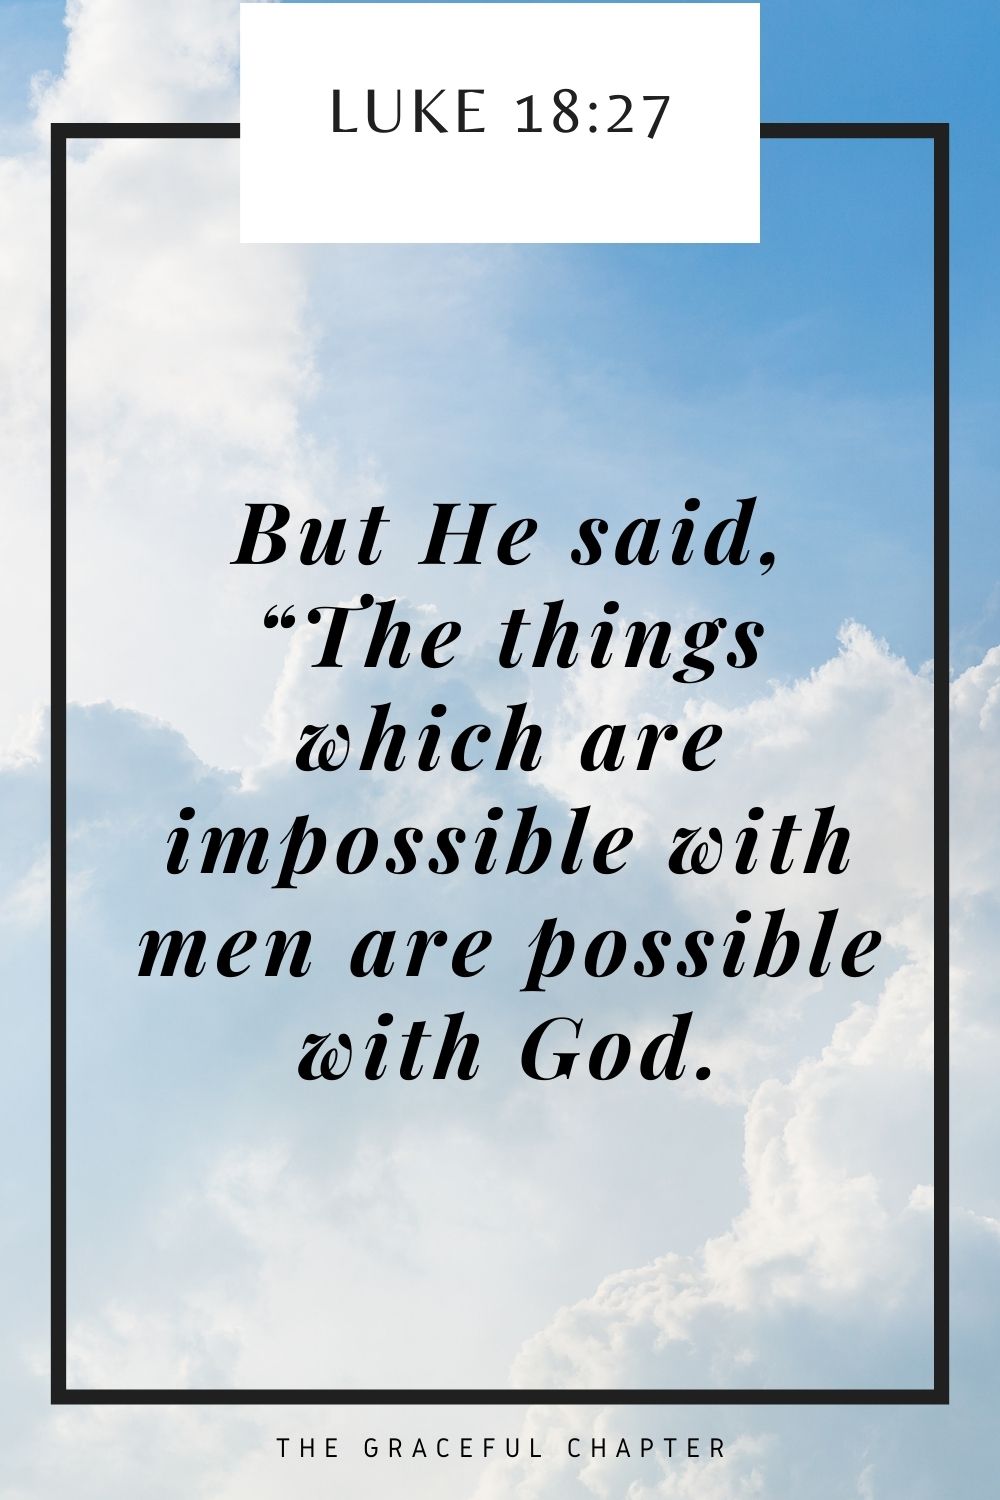 But He said, “The things which are impossible with men are possible with God. Luke 18:27